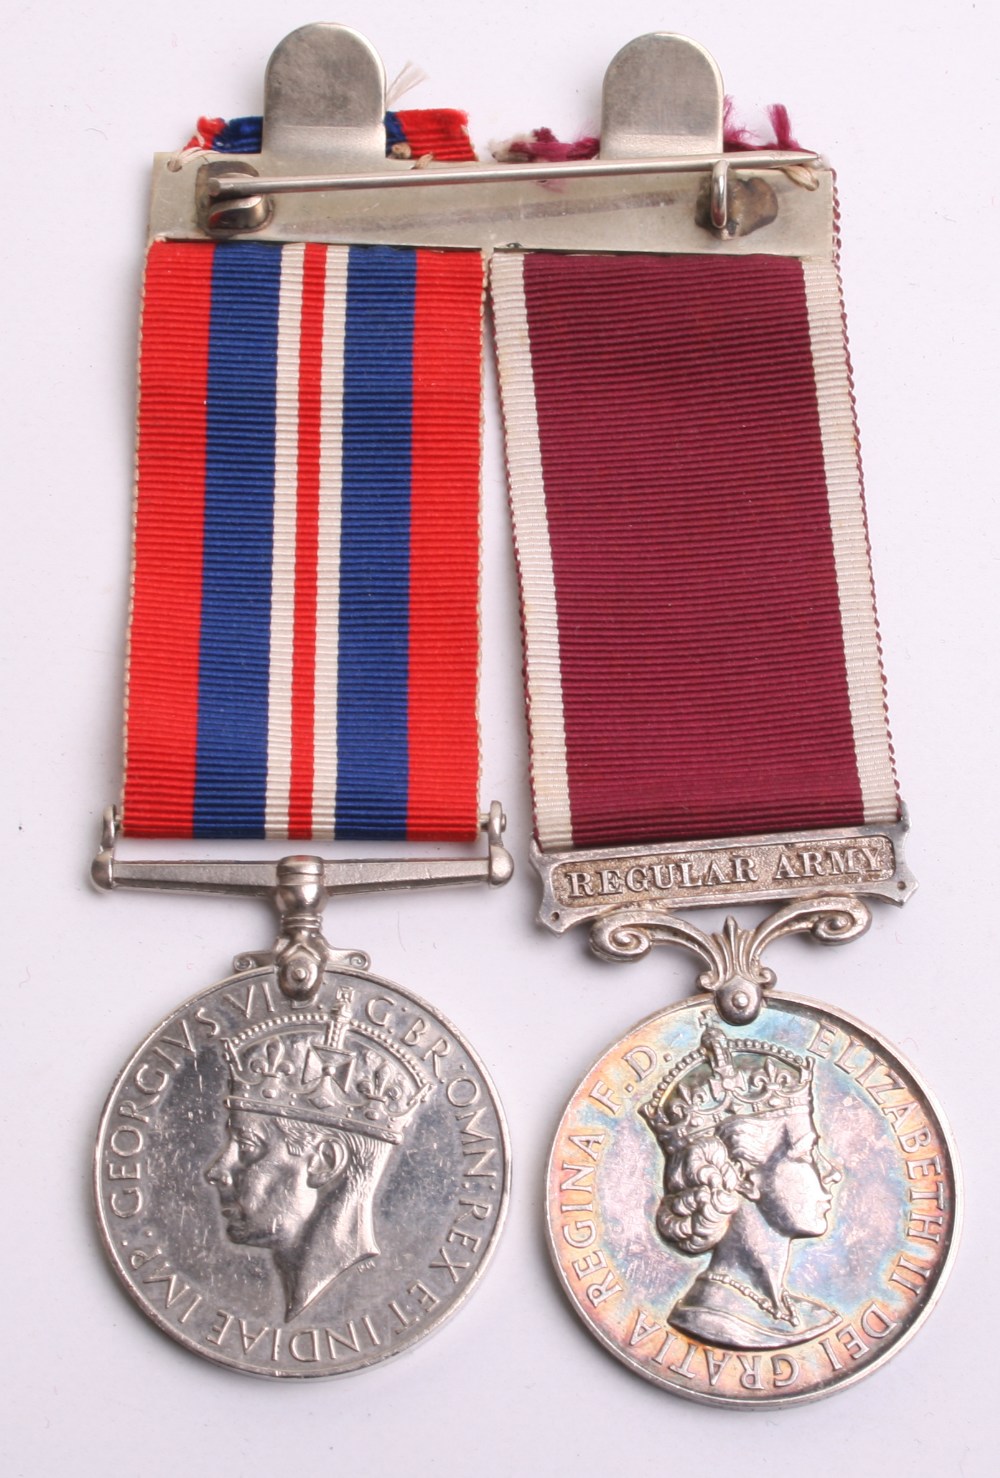 Woman’s Royal Army Corps (WRAC) Medal Pair, consisting of 1939-45 War medal and EIIR Regular Army